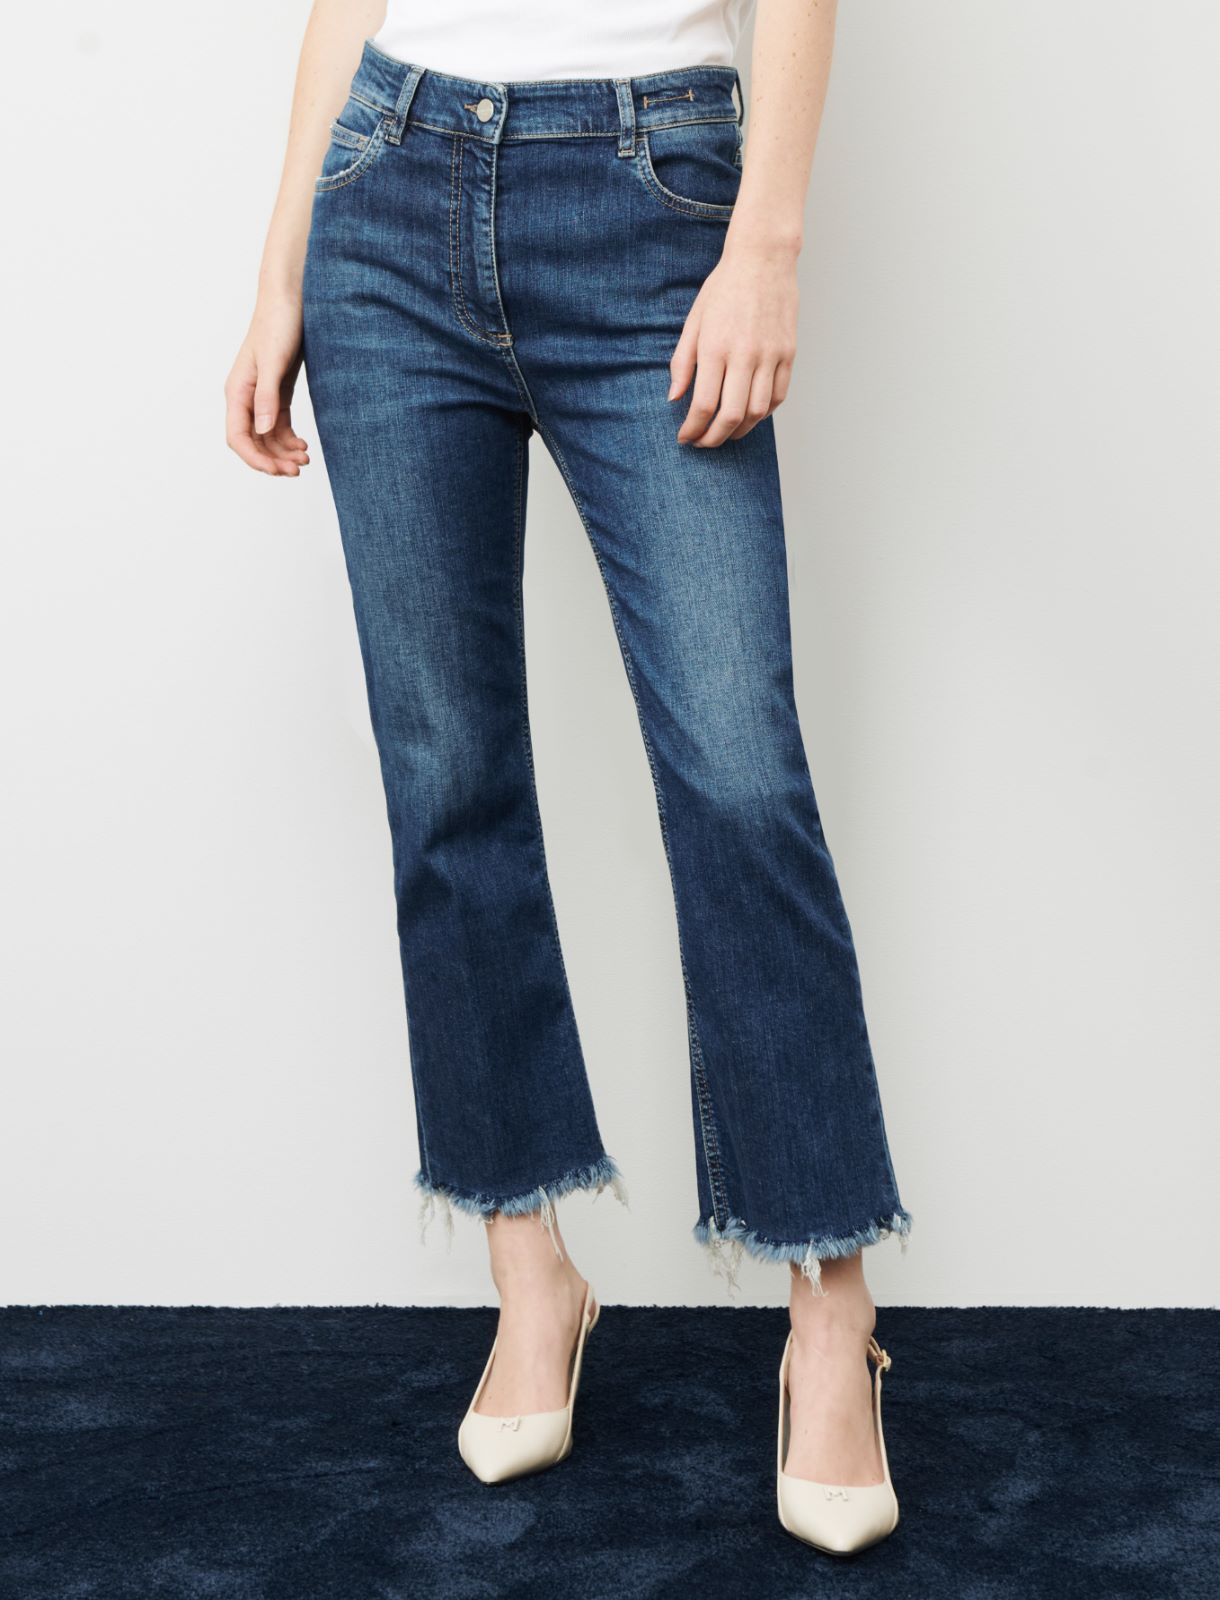 Flared jeans - Blue jeans - Marella - 2